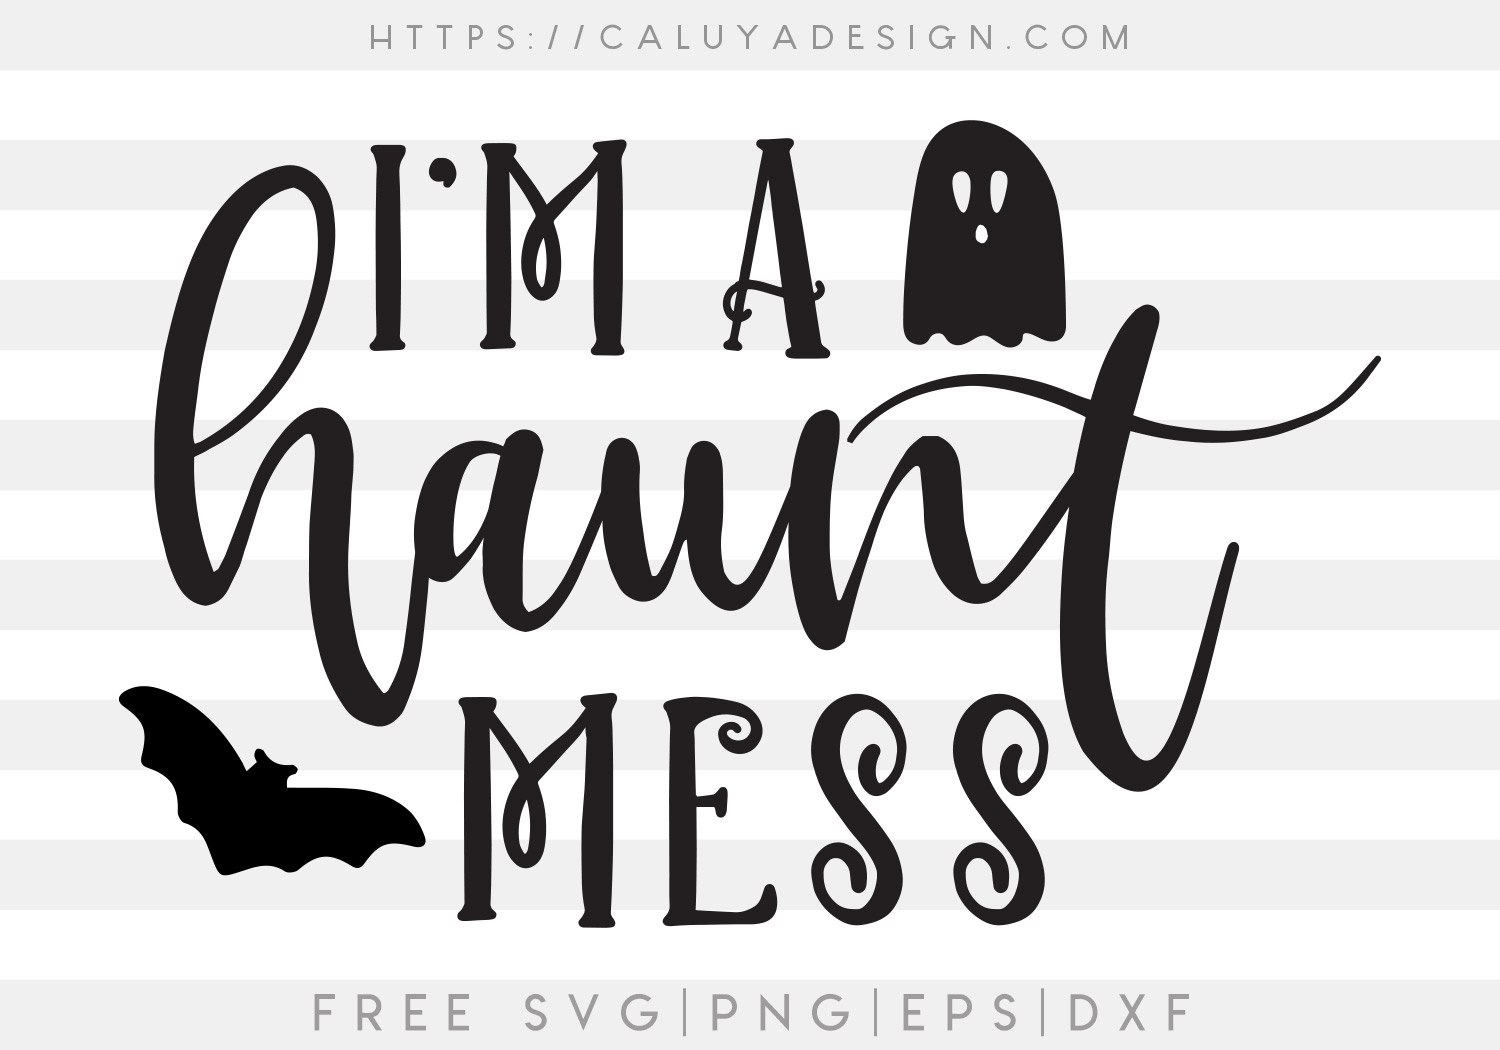 Haunt Mess SVG, PNG, EPS & DXF